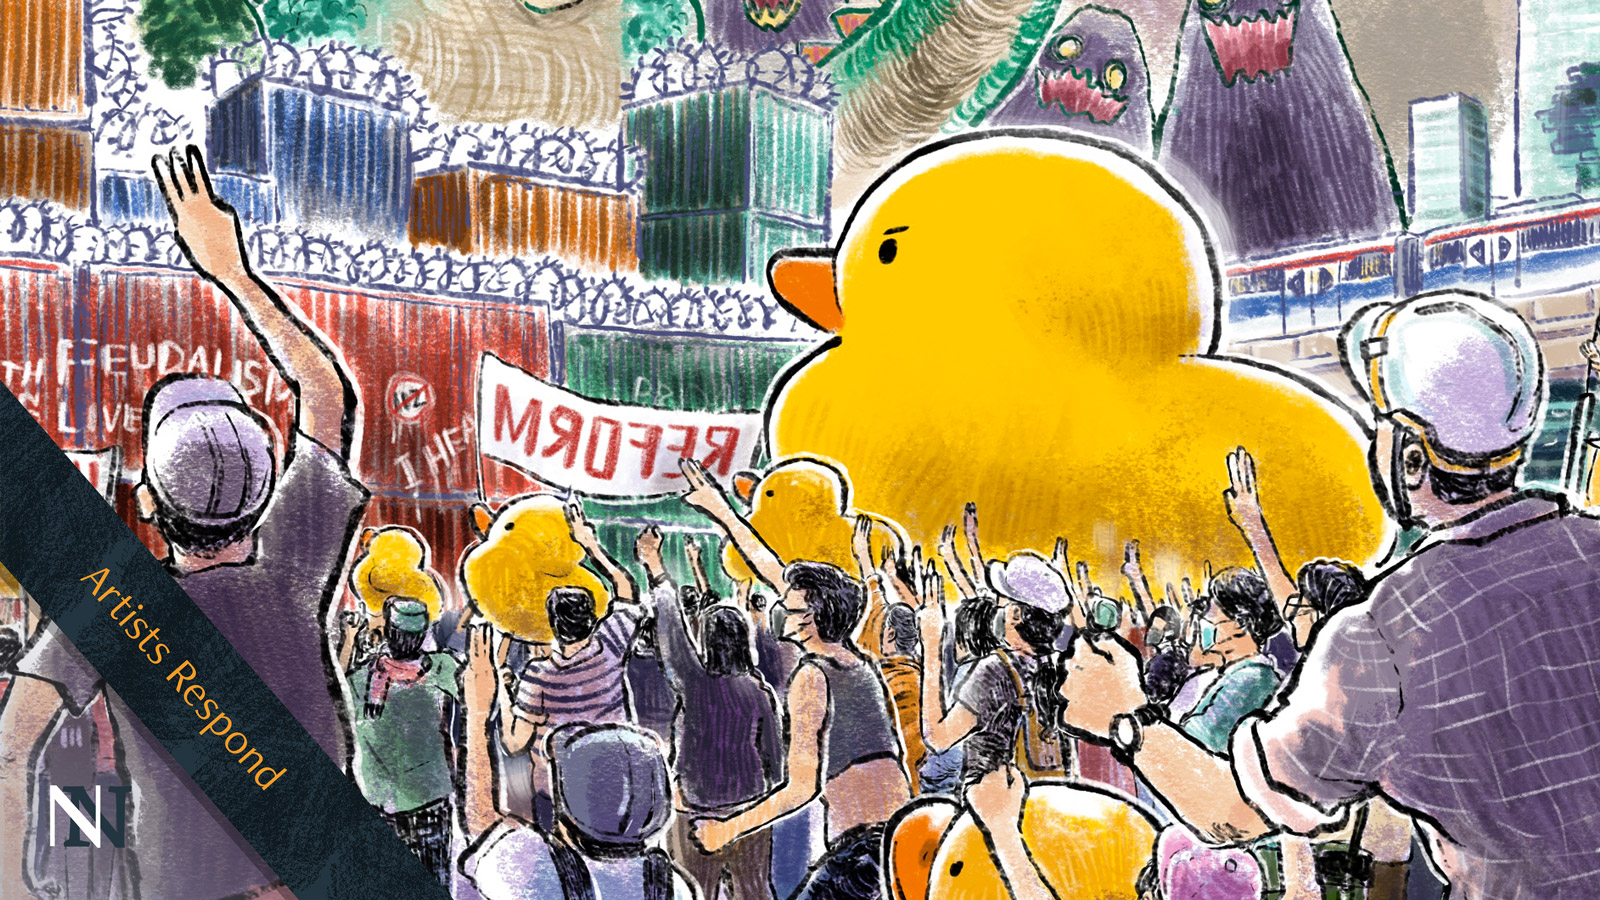 An illustration showing a crowd of protestors with giant yellow rubber ducks.